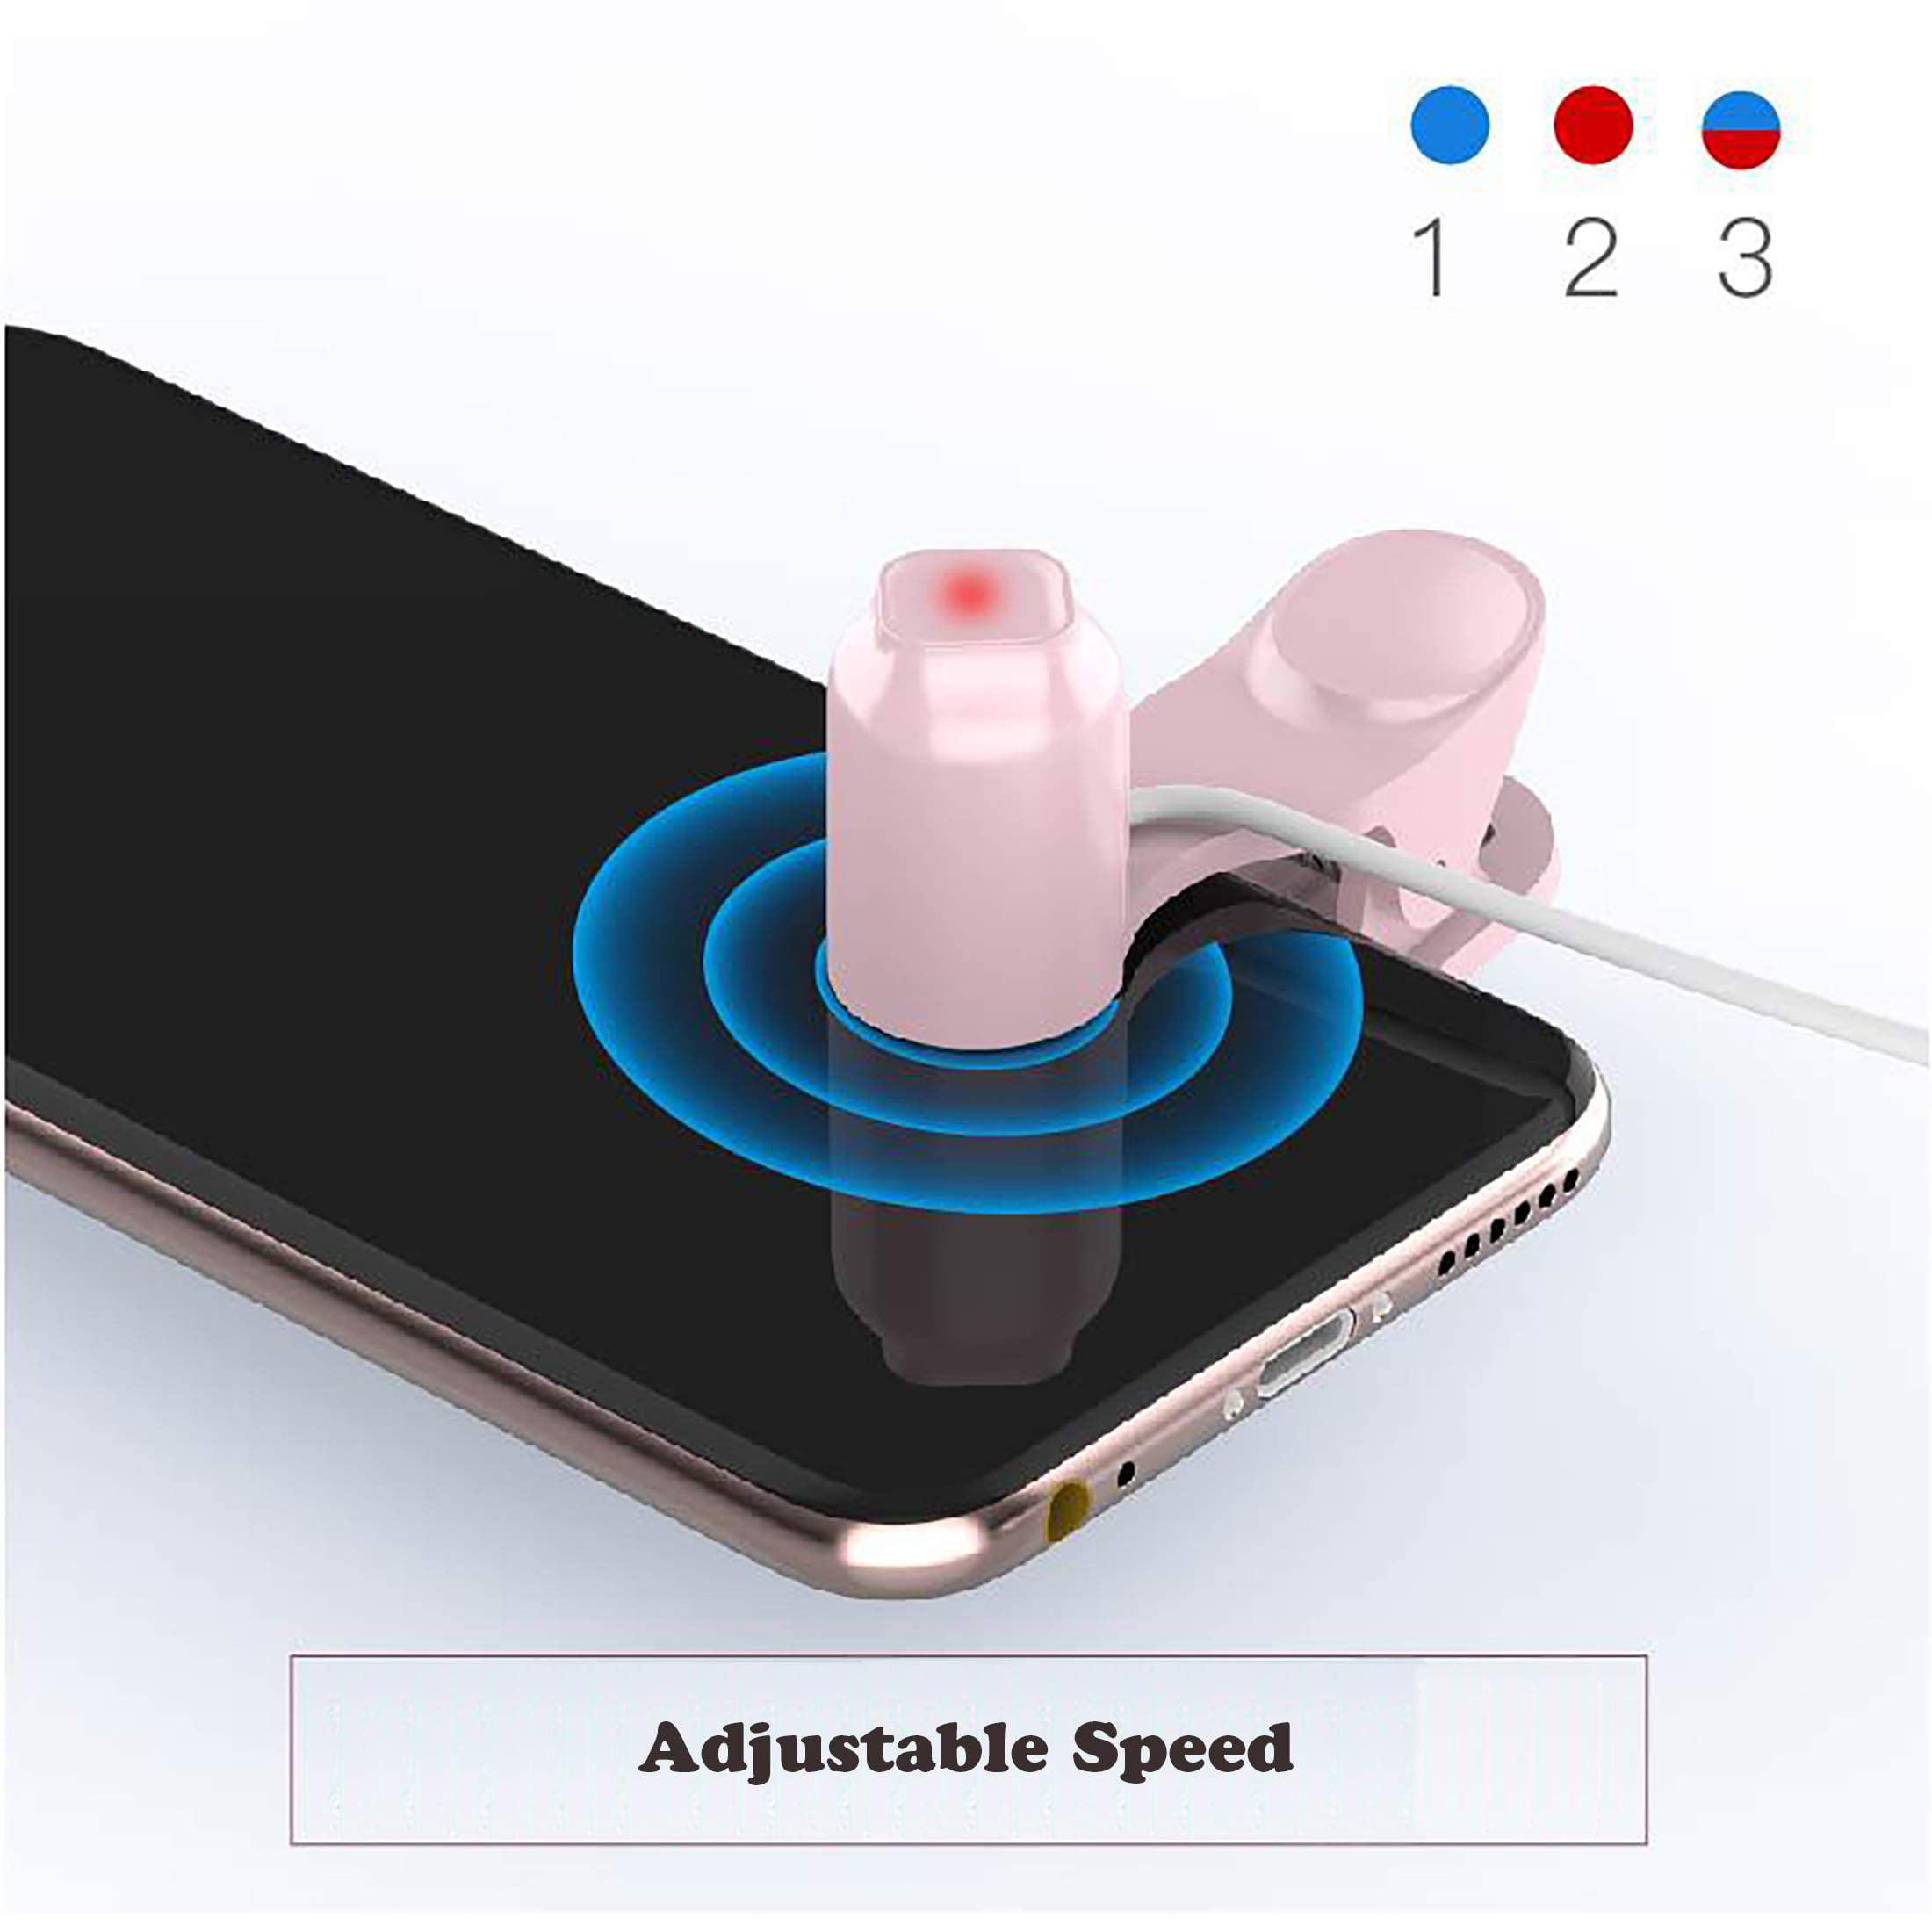 New Tiktok auto like screen clicker game cycle click auto like intelligent  speed can be adjusted without hurting the screen - AliExpress